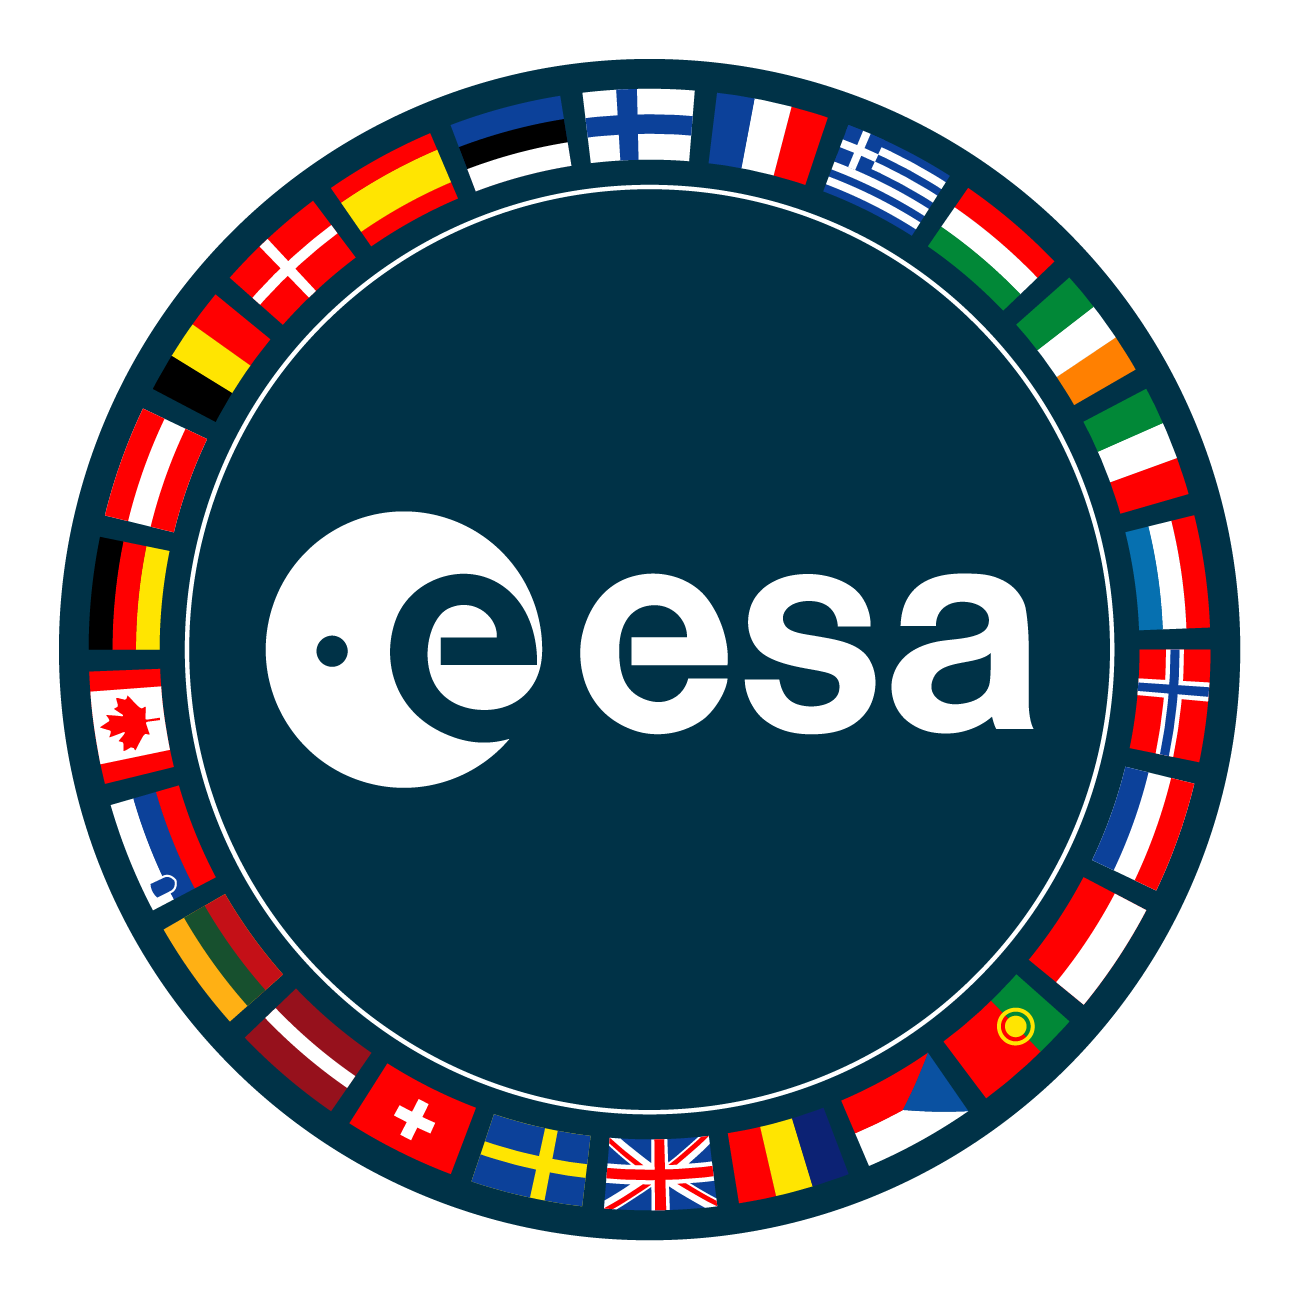 ESA patch representing the ESA logo surrounded by the flags of ESA’s Member States.